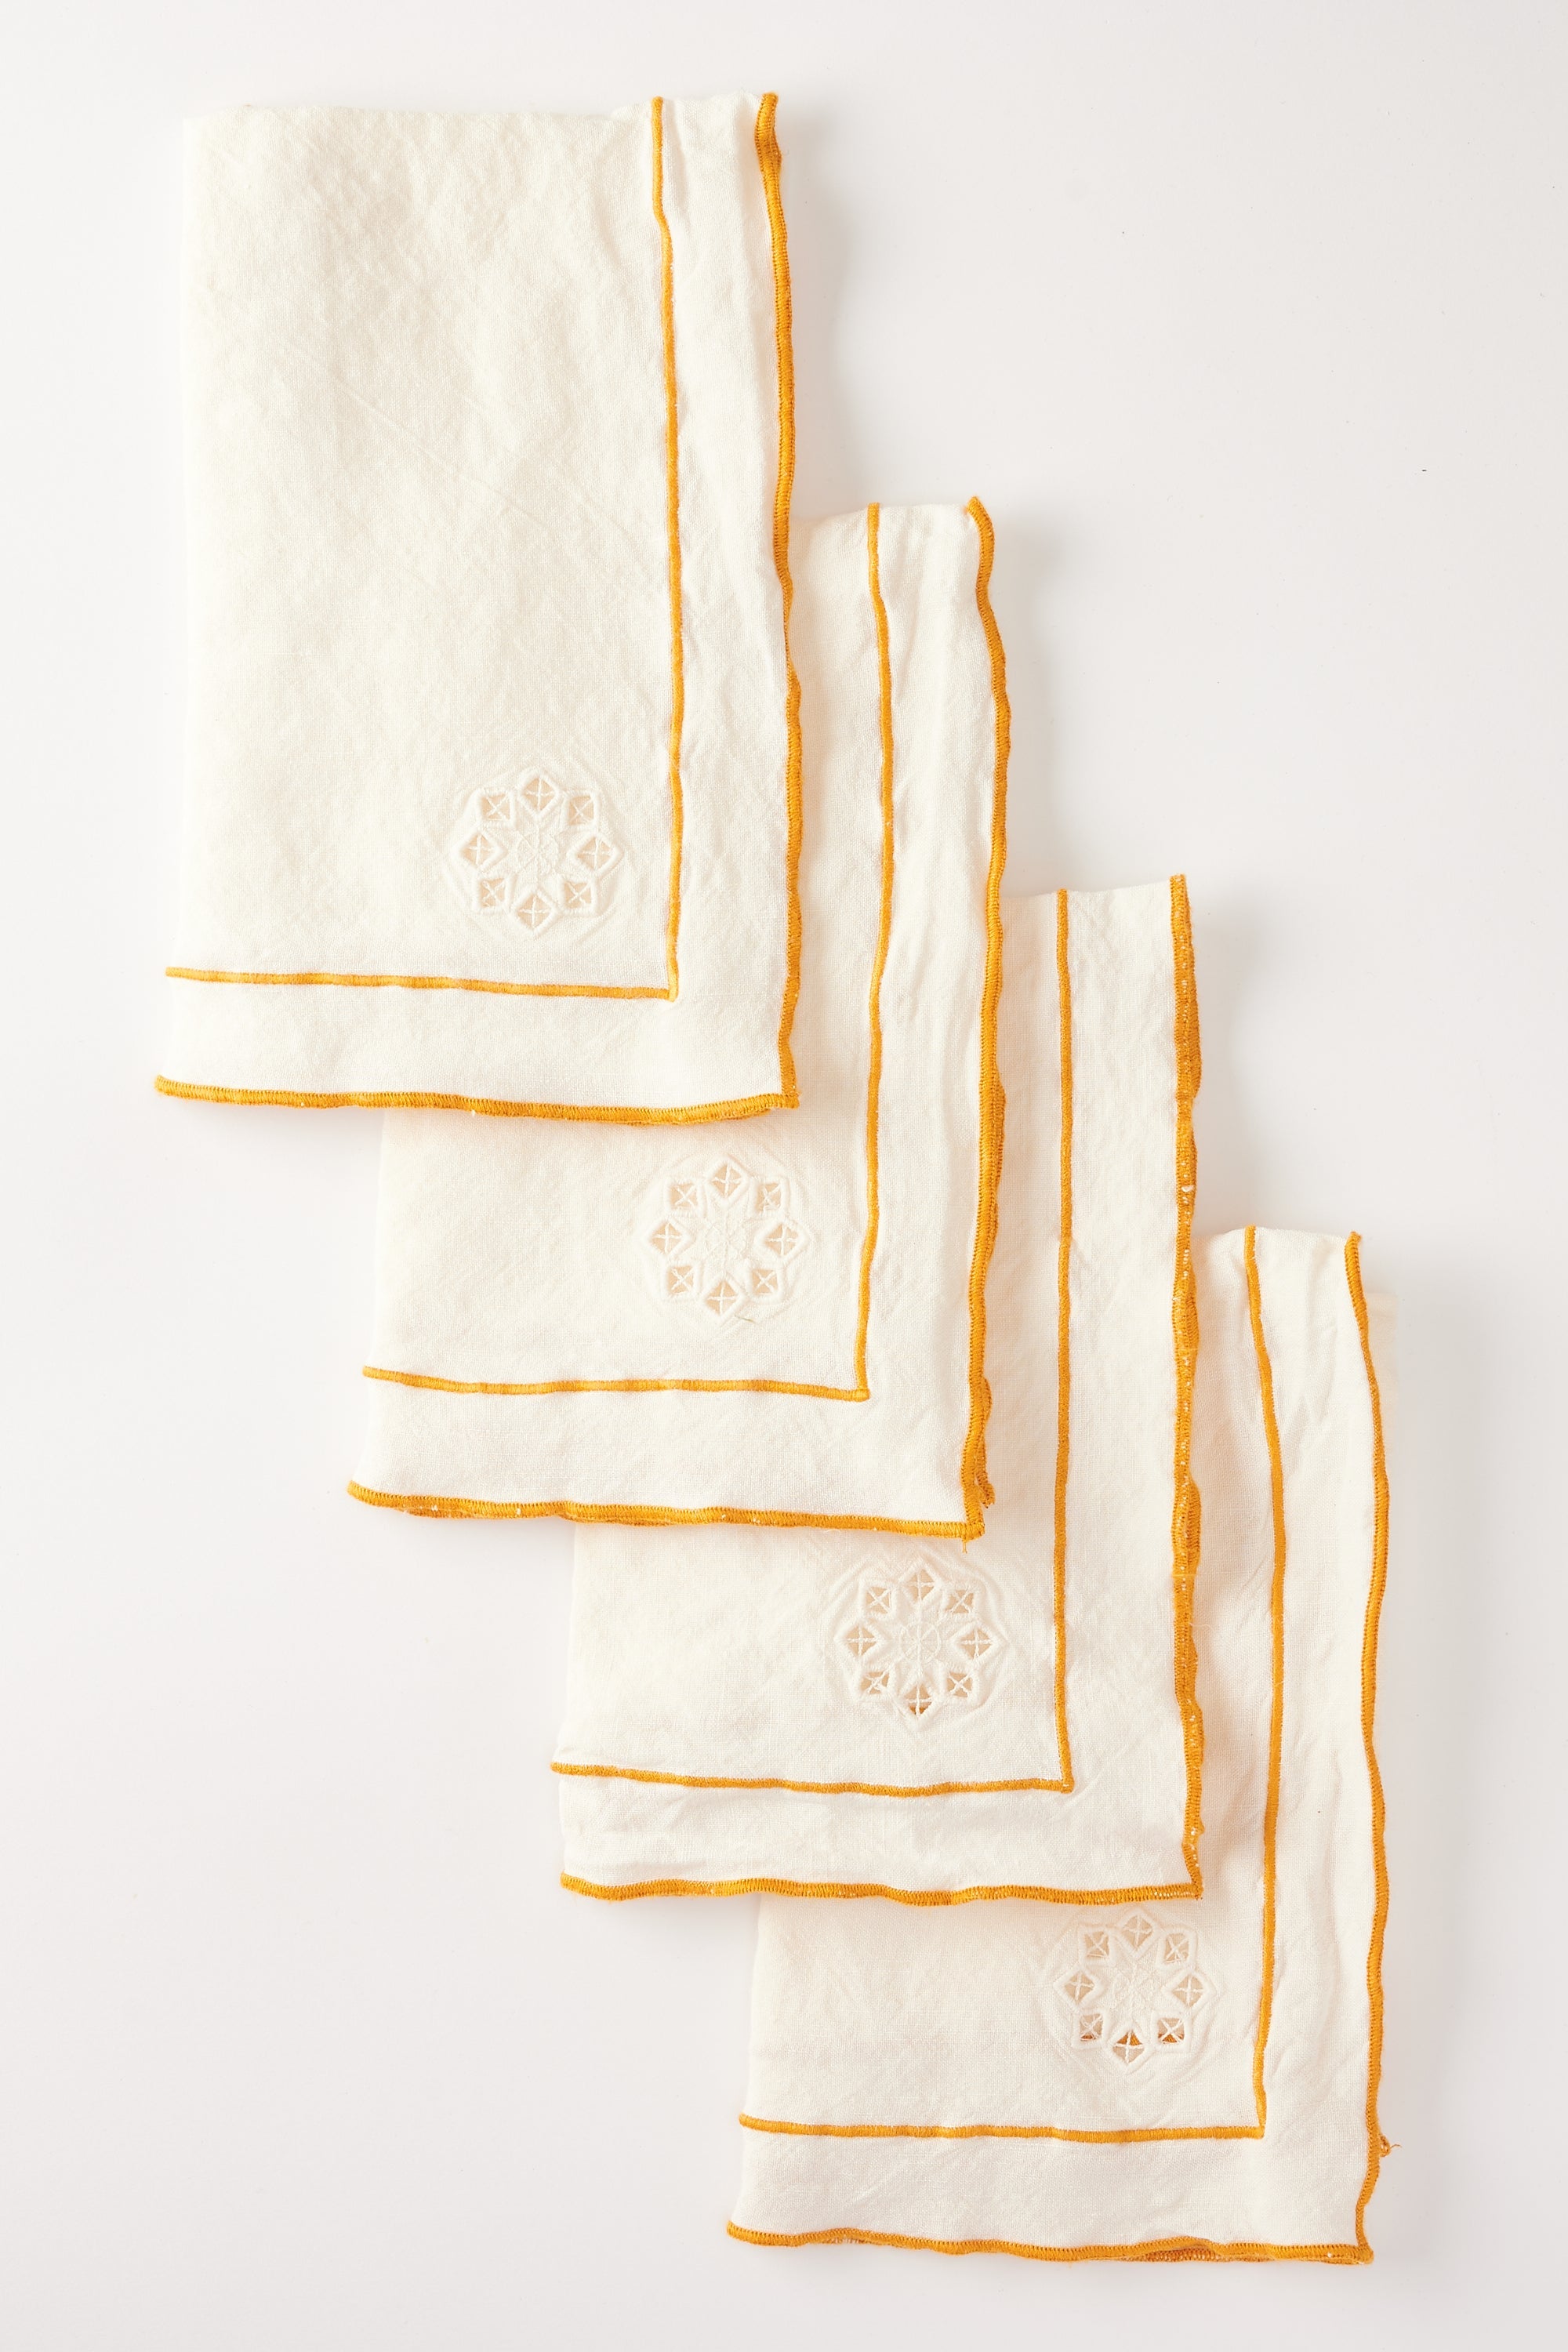 Day For Night Napkins Cream Base with Marigold